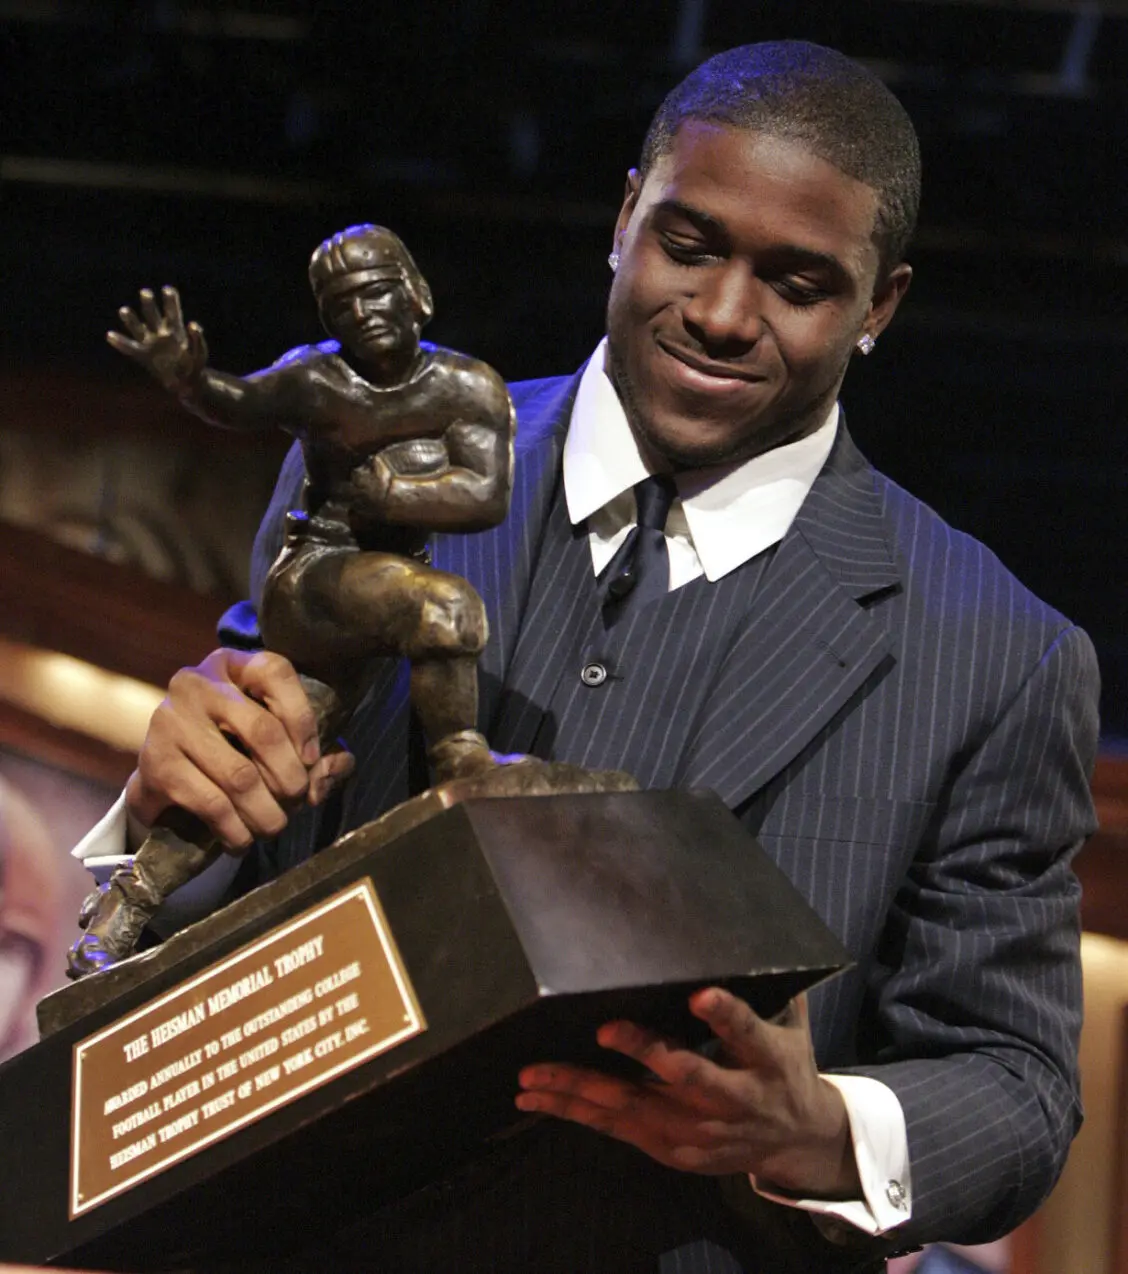 LA Post: Reggie Bush reinstated as 2005 Heisman Trophy winner. Changes in NCAA rules led to the decision